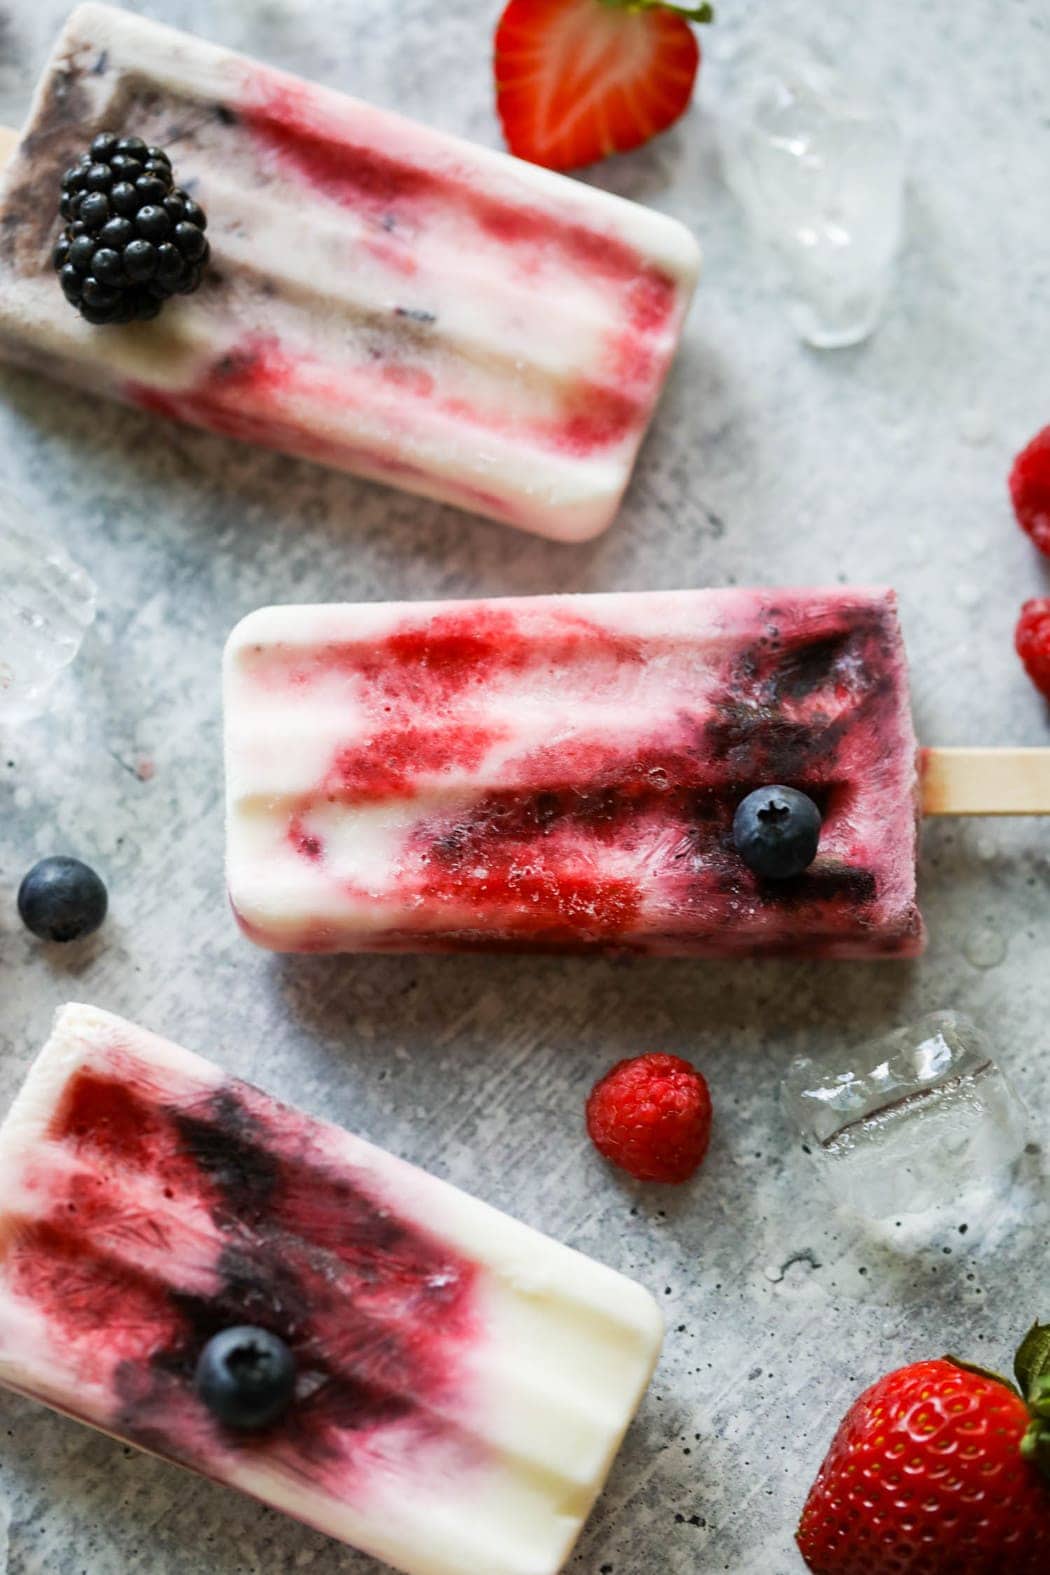 Creamy Yogurt Popsicles with Berries - The Real Food Dietitians